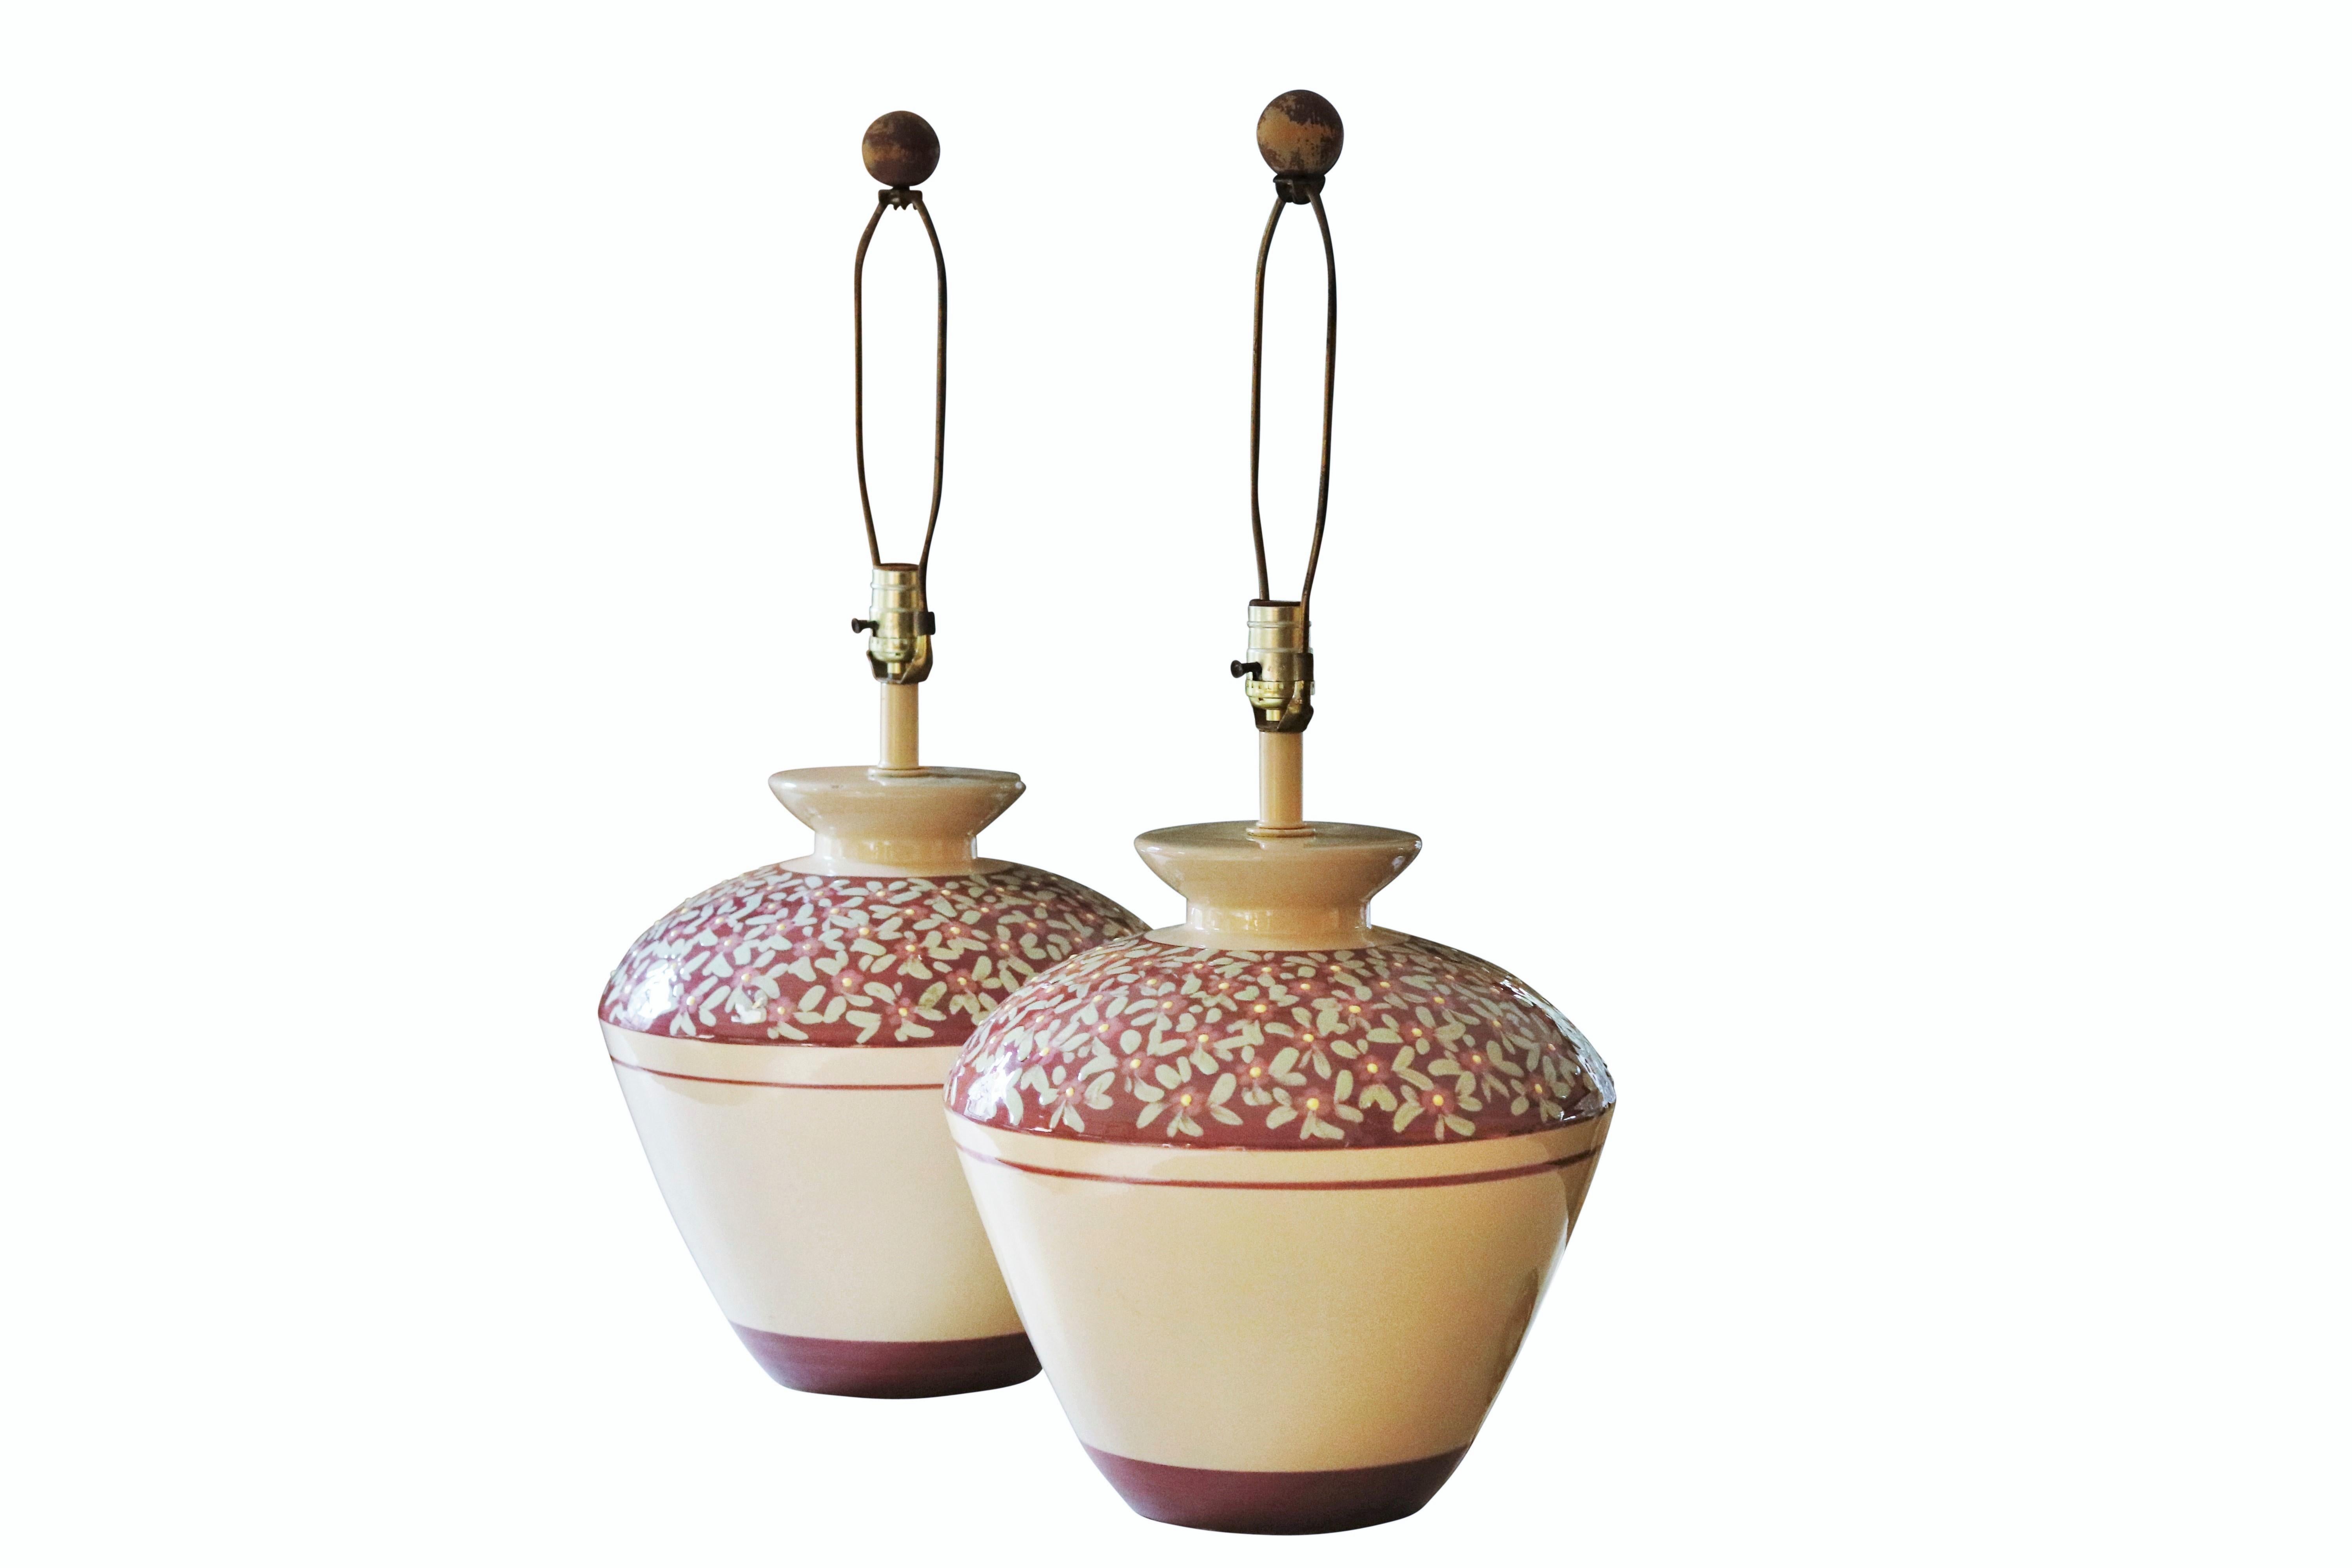 A pair of large floral ceramic table lamps. Large vases are taupe on the base with a purple top. Small blue flowers with yellow centers decorate the purple tops. Harps are topped with round wooden finials. Wired and working. Each lamp measures